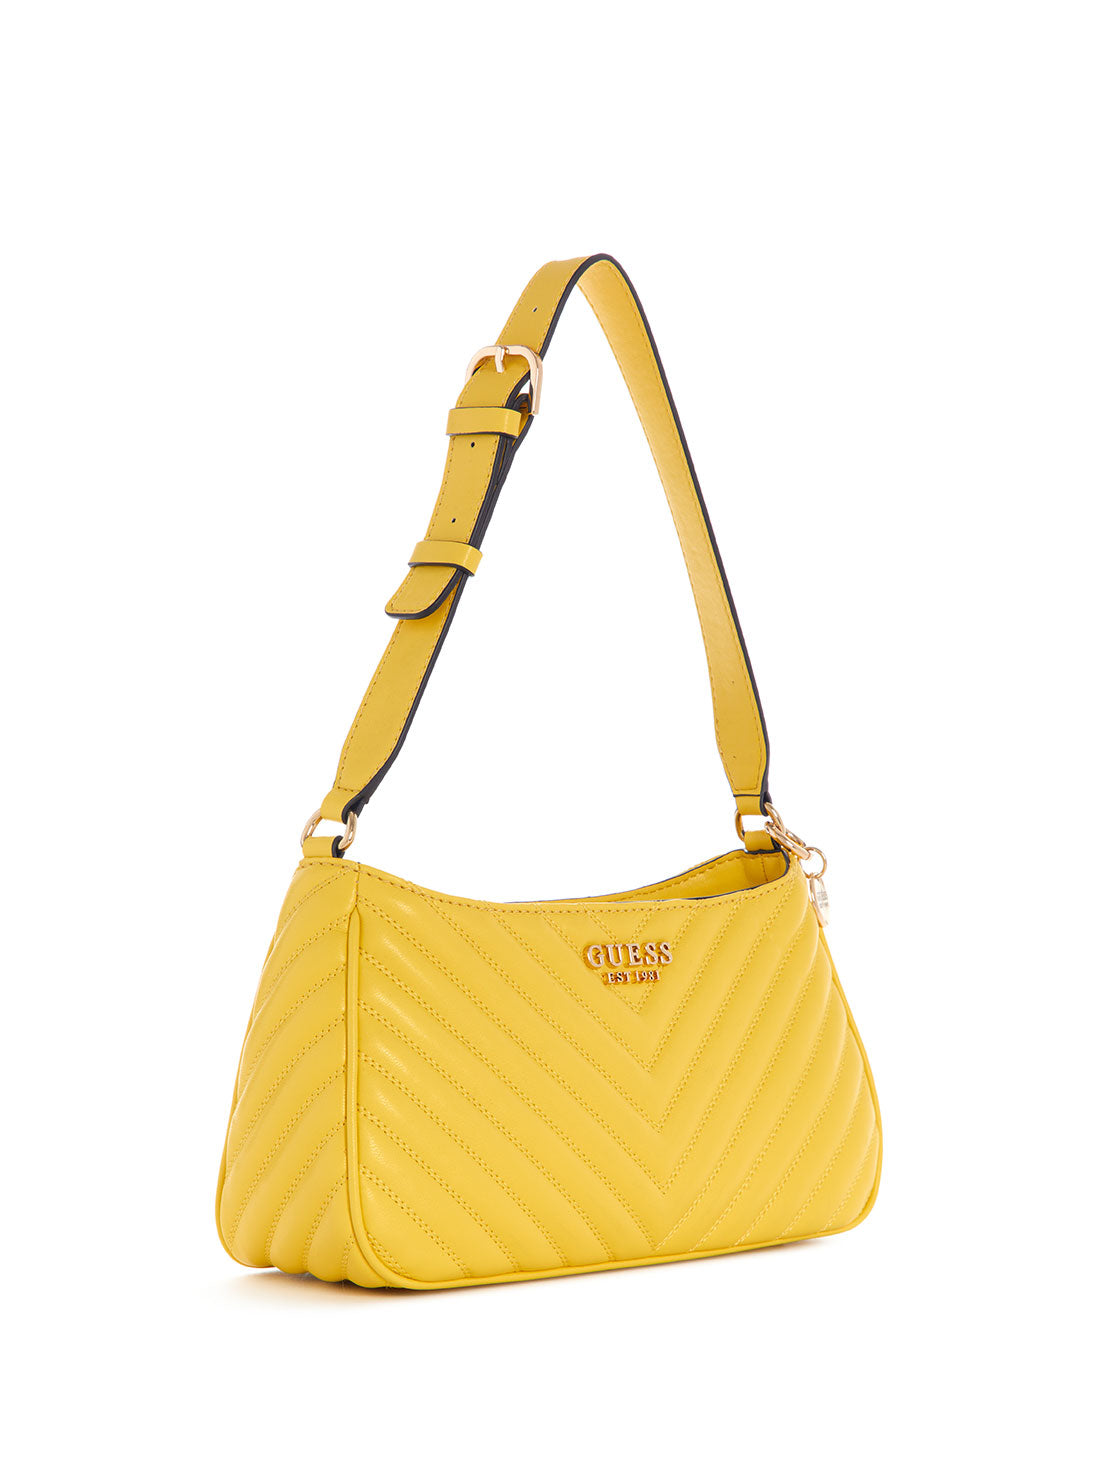 GUESS Women's Yellow Keillah Quilted Shoulder Bag QG869018 Front Side View